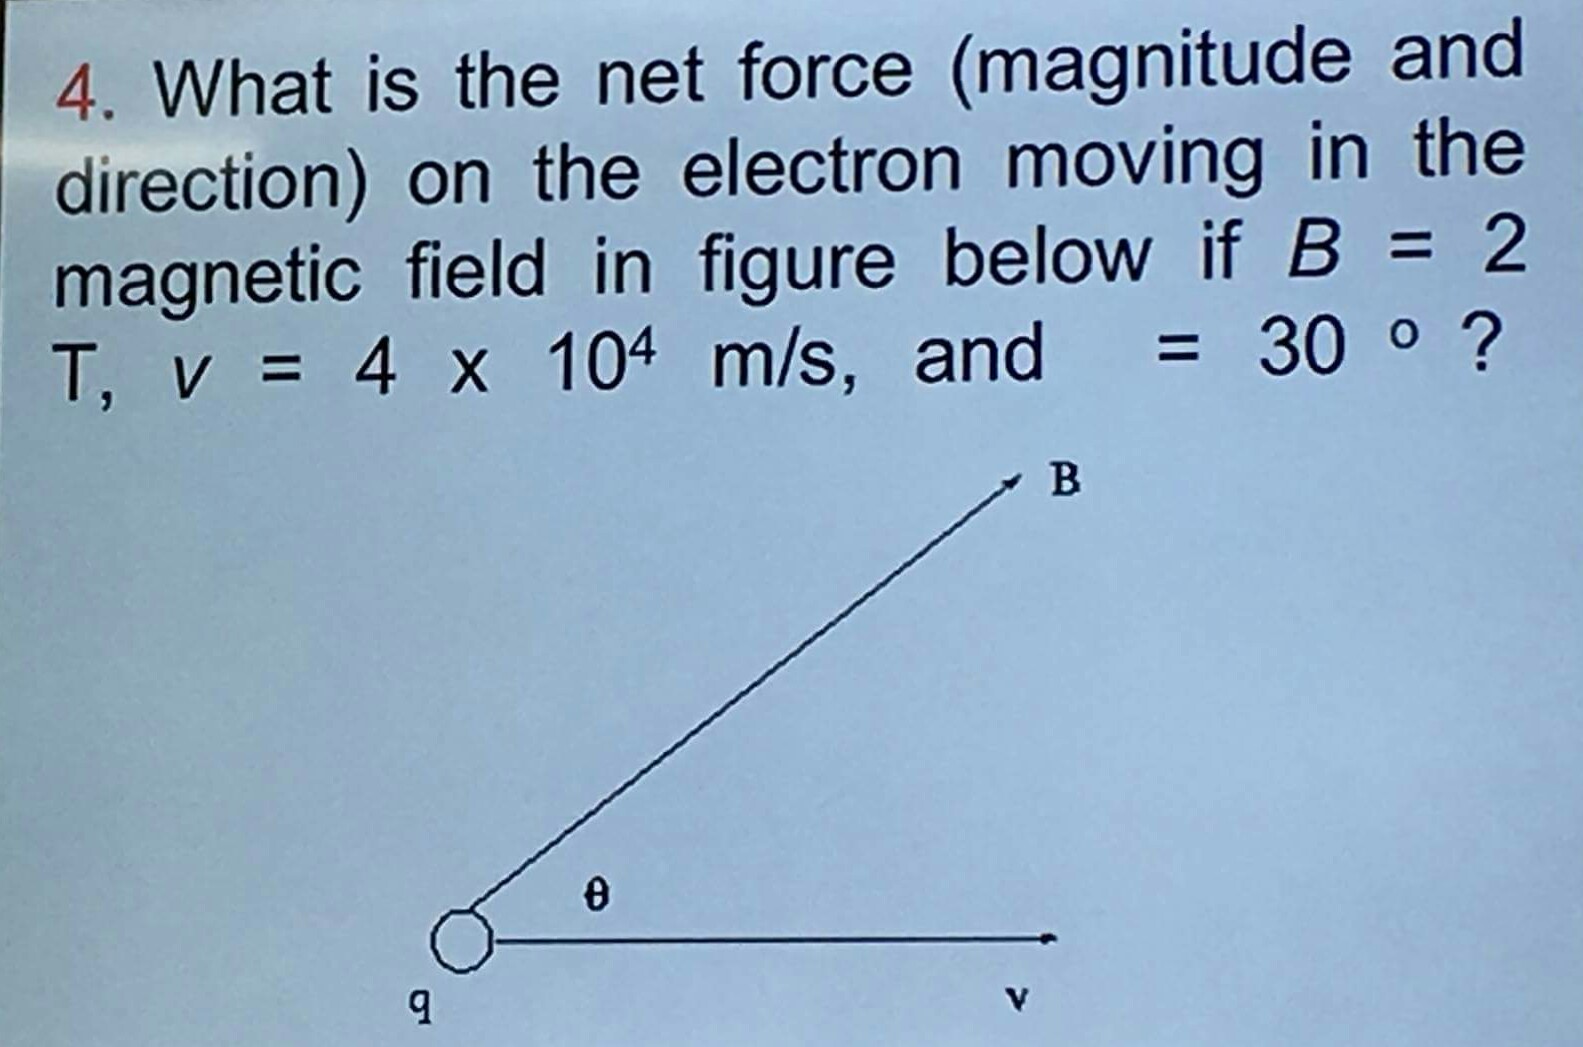 how to find magnitude and direction of net force